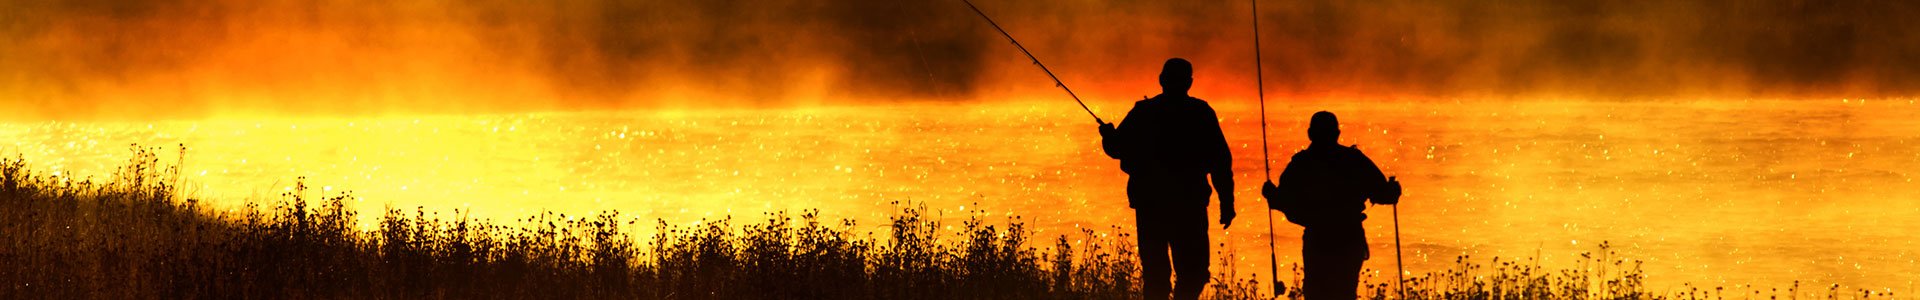 Outdoor Recreation Insurance for Fishing Guides